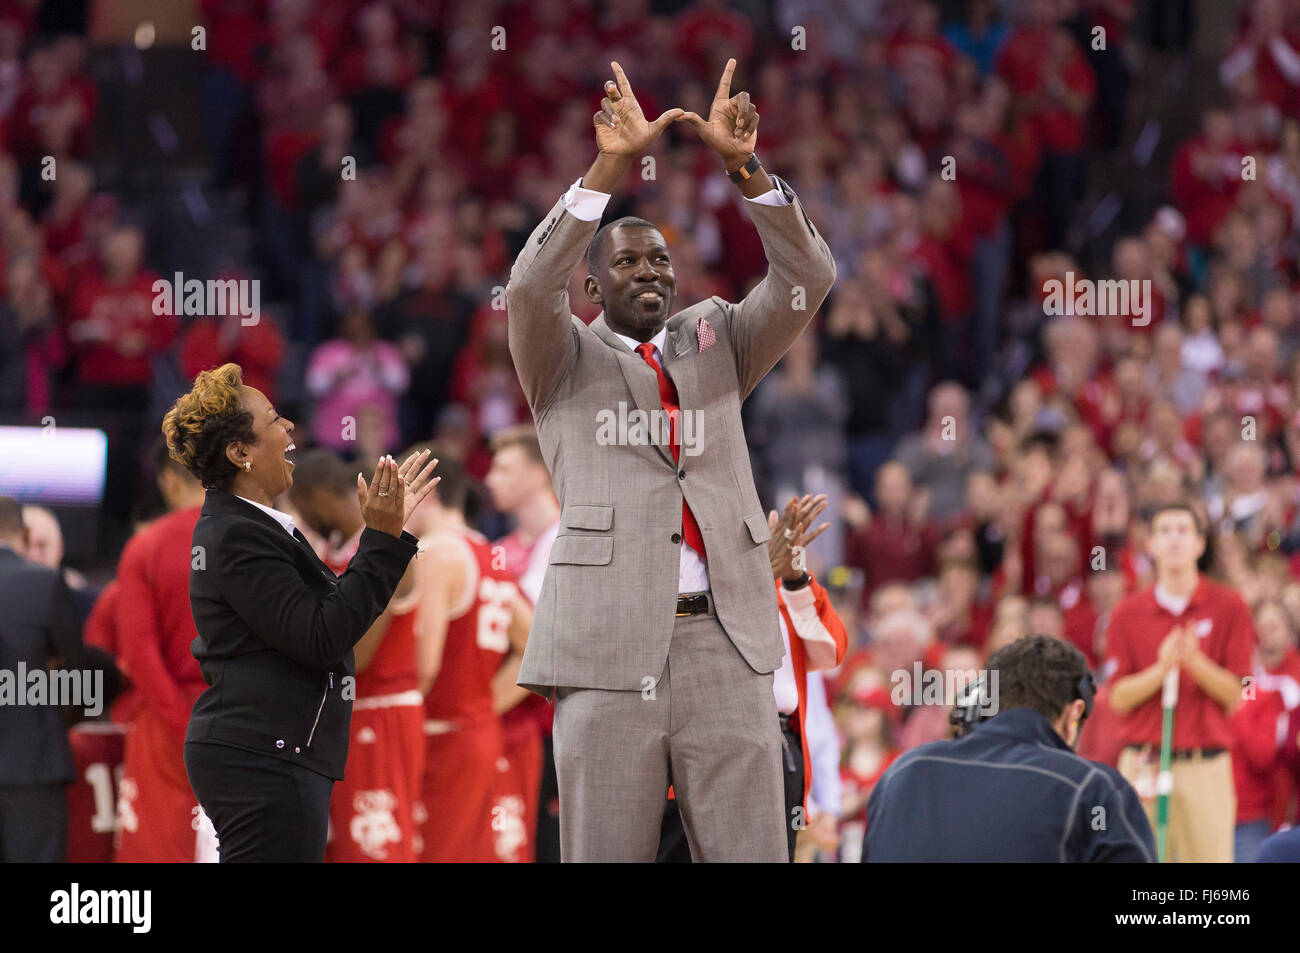 Madison, WI, USA. 28th Feb, 2016. Michael Finley is honored during the NCAA Basketball game between the Michigan Wolverines and the Wisconsin Badgers at the Kohl Center in Madison, WI. Wisconsin defeated Michigan 68-57. John Fisher/CSM/Alamy Live News Stock Photo